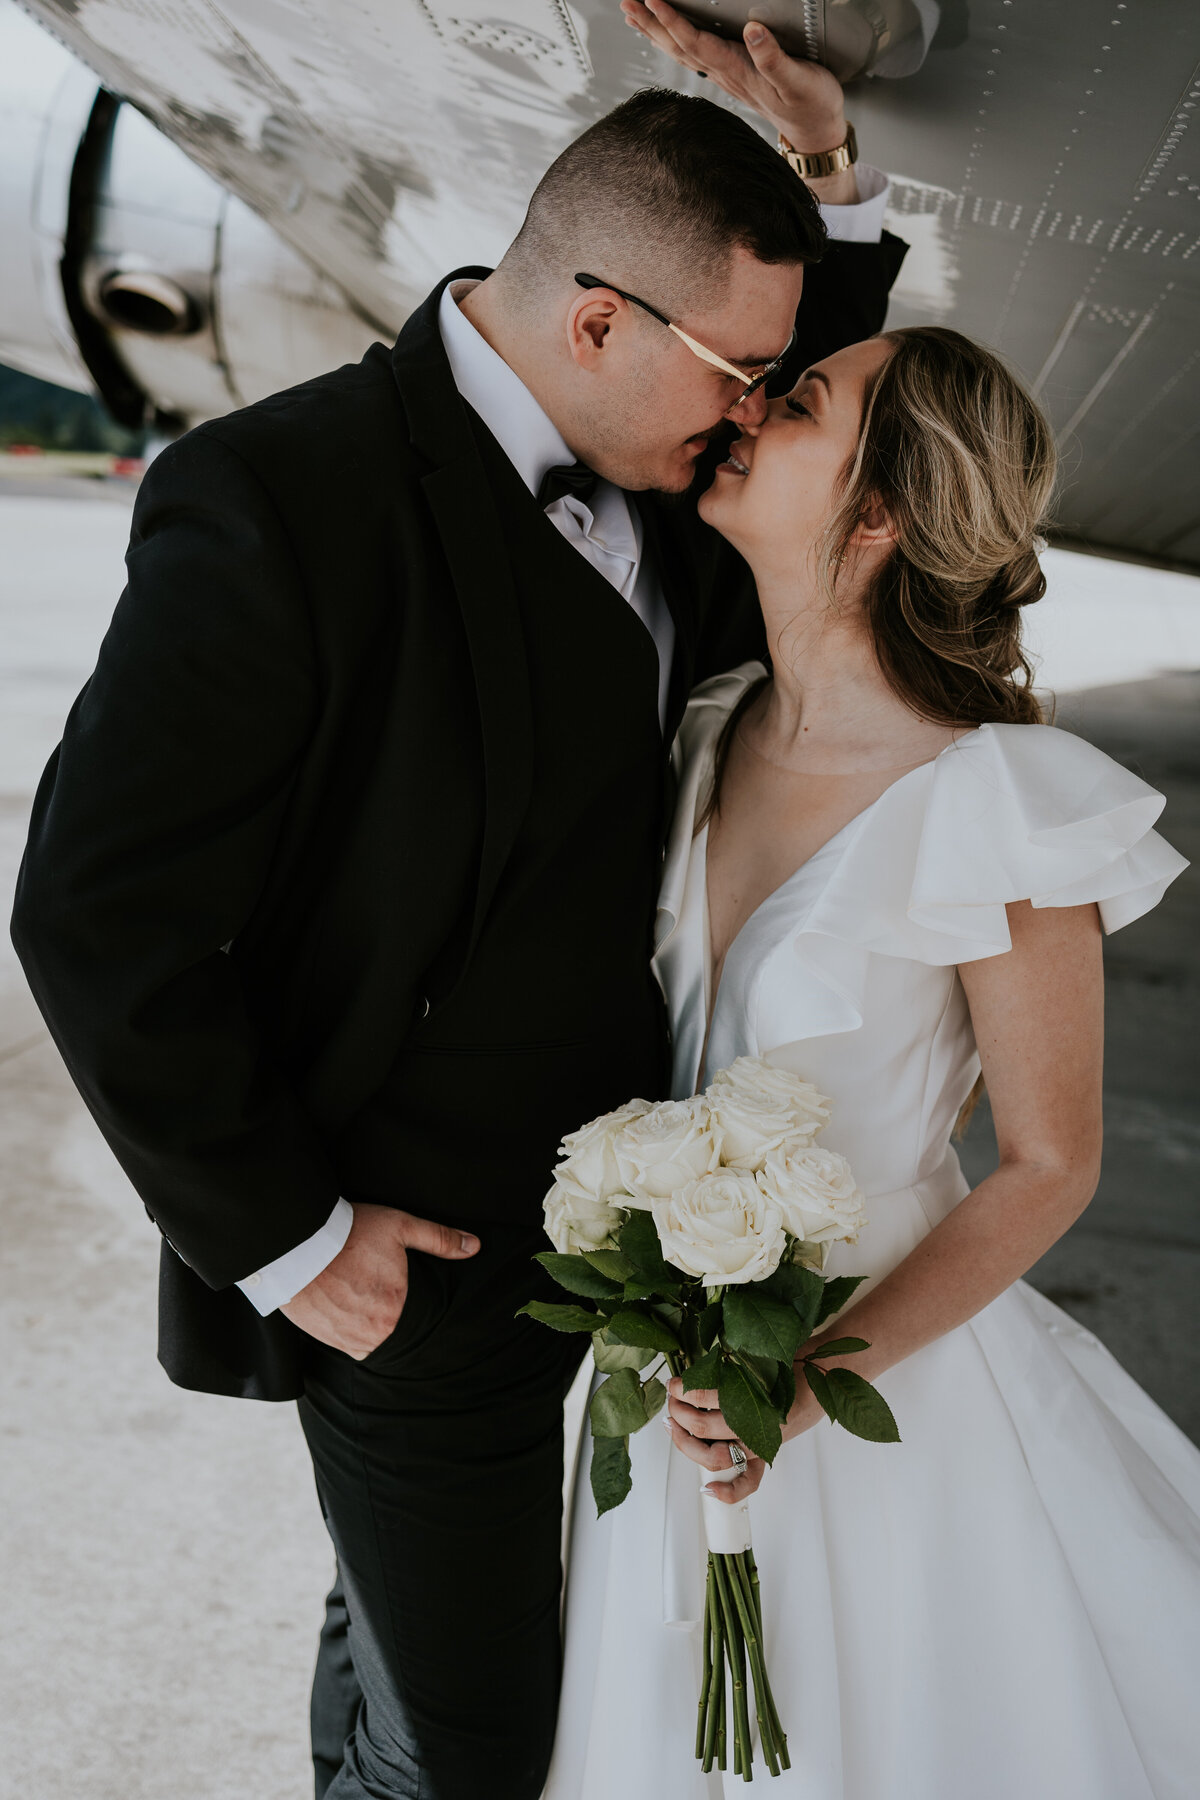 Groom leans in to kiss bride while standing underneath WWII plane wing.